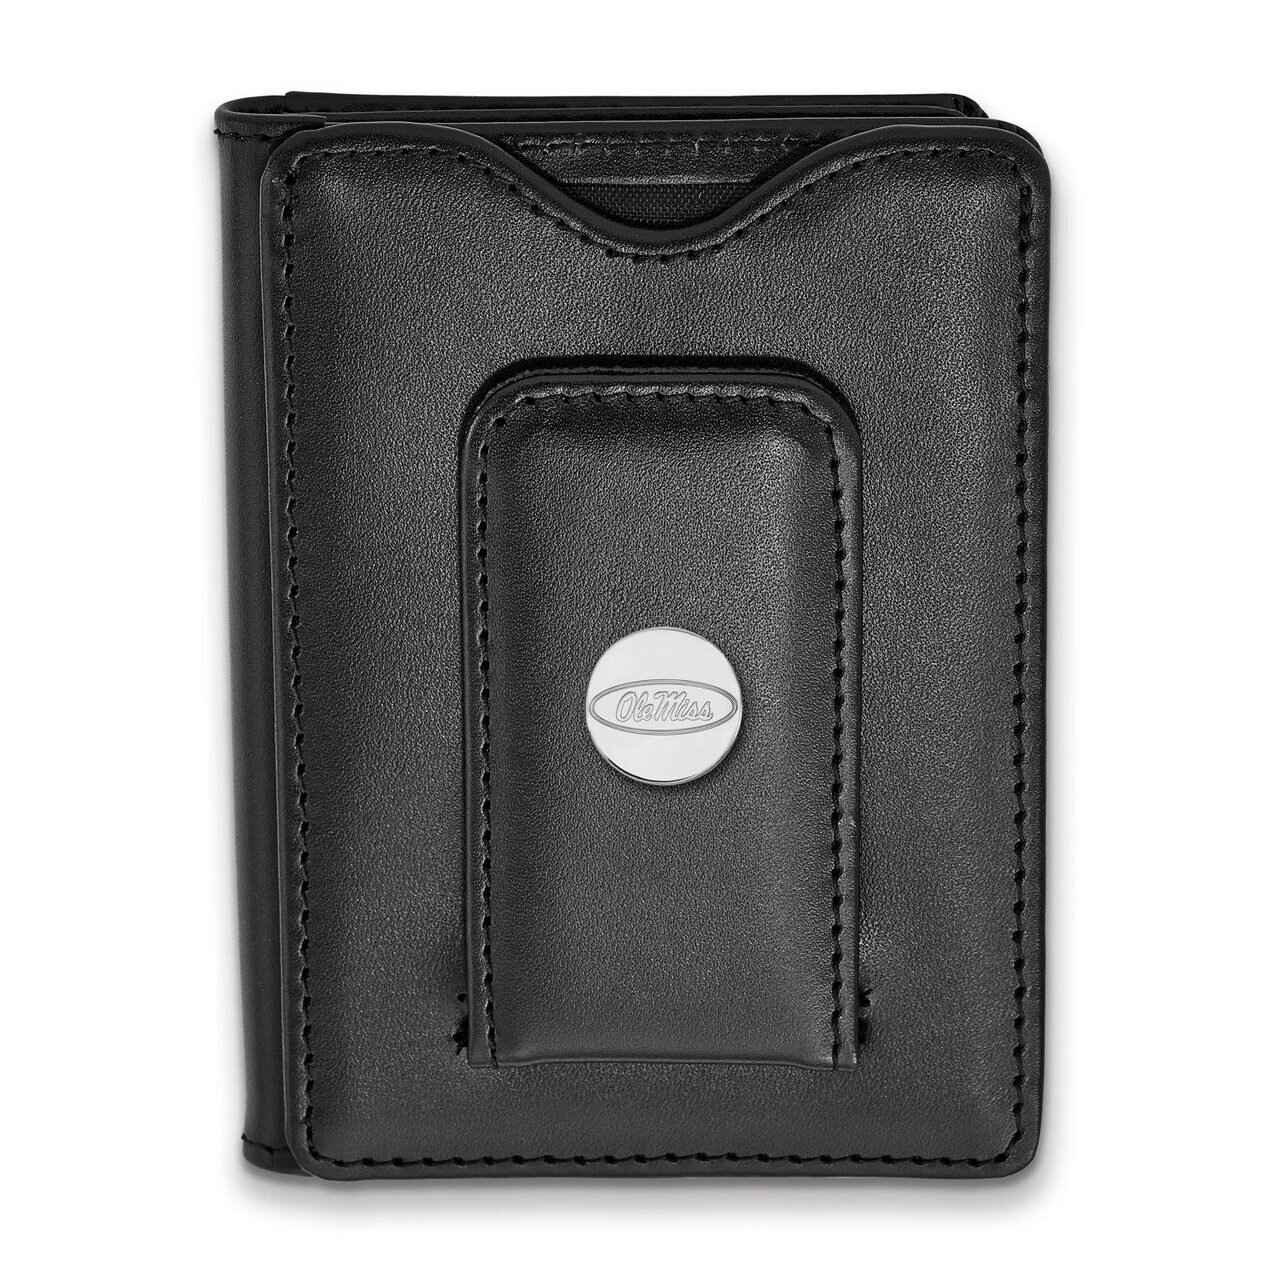 University of Missisippi Black Leather Wallet SS013UMS-W1